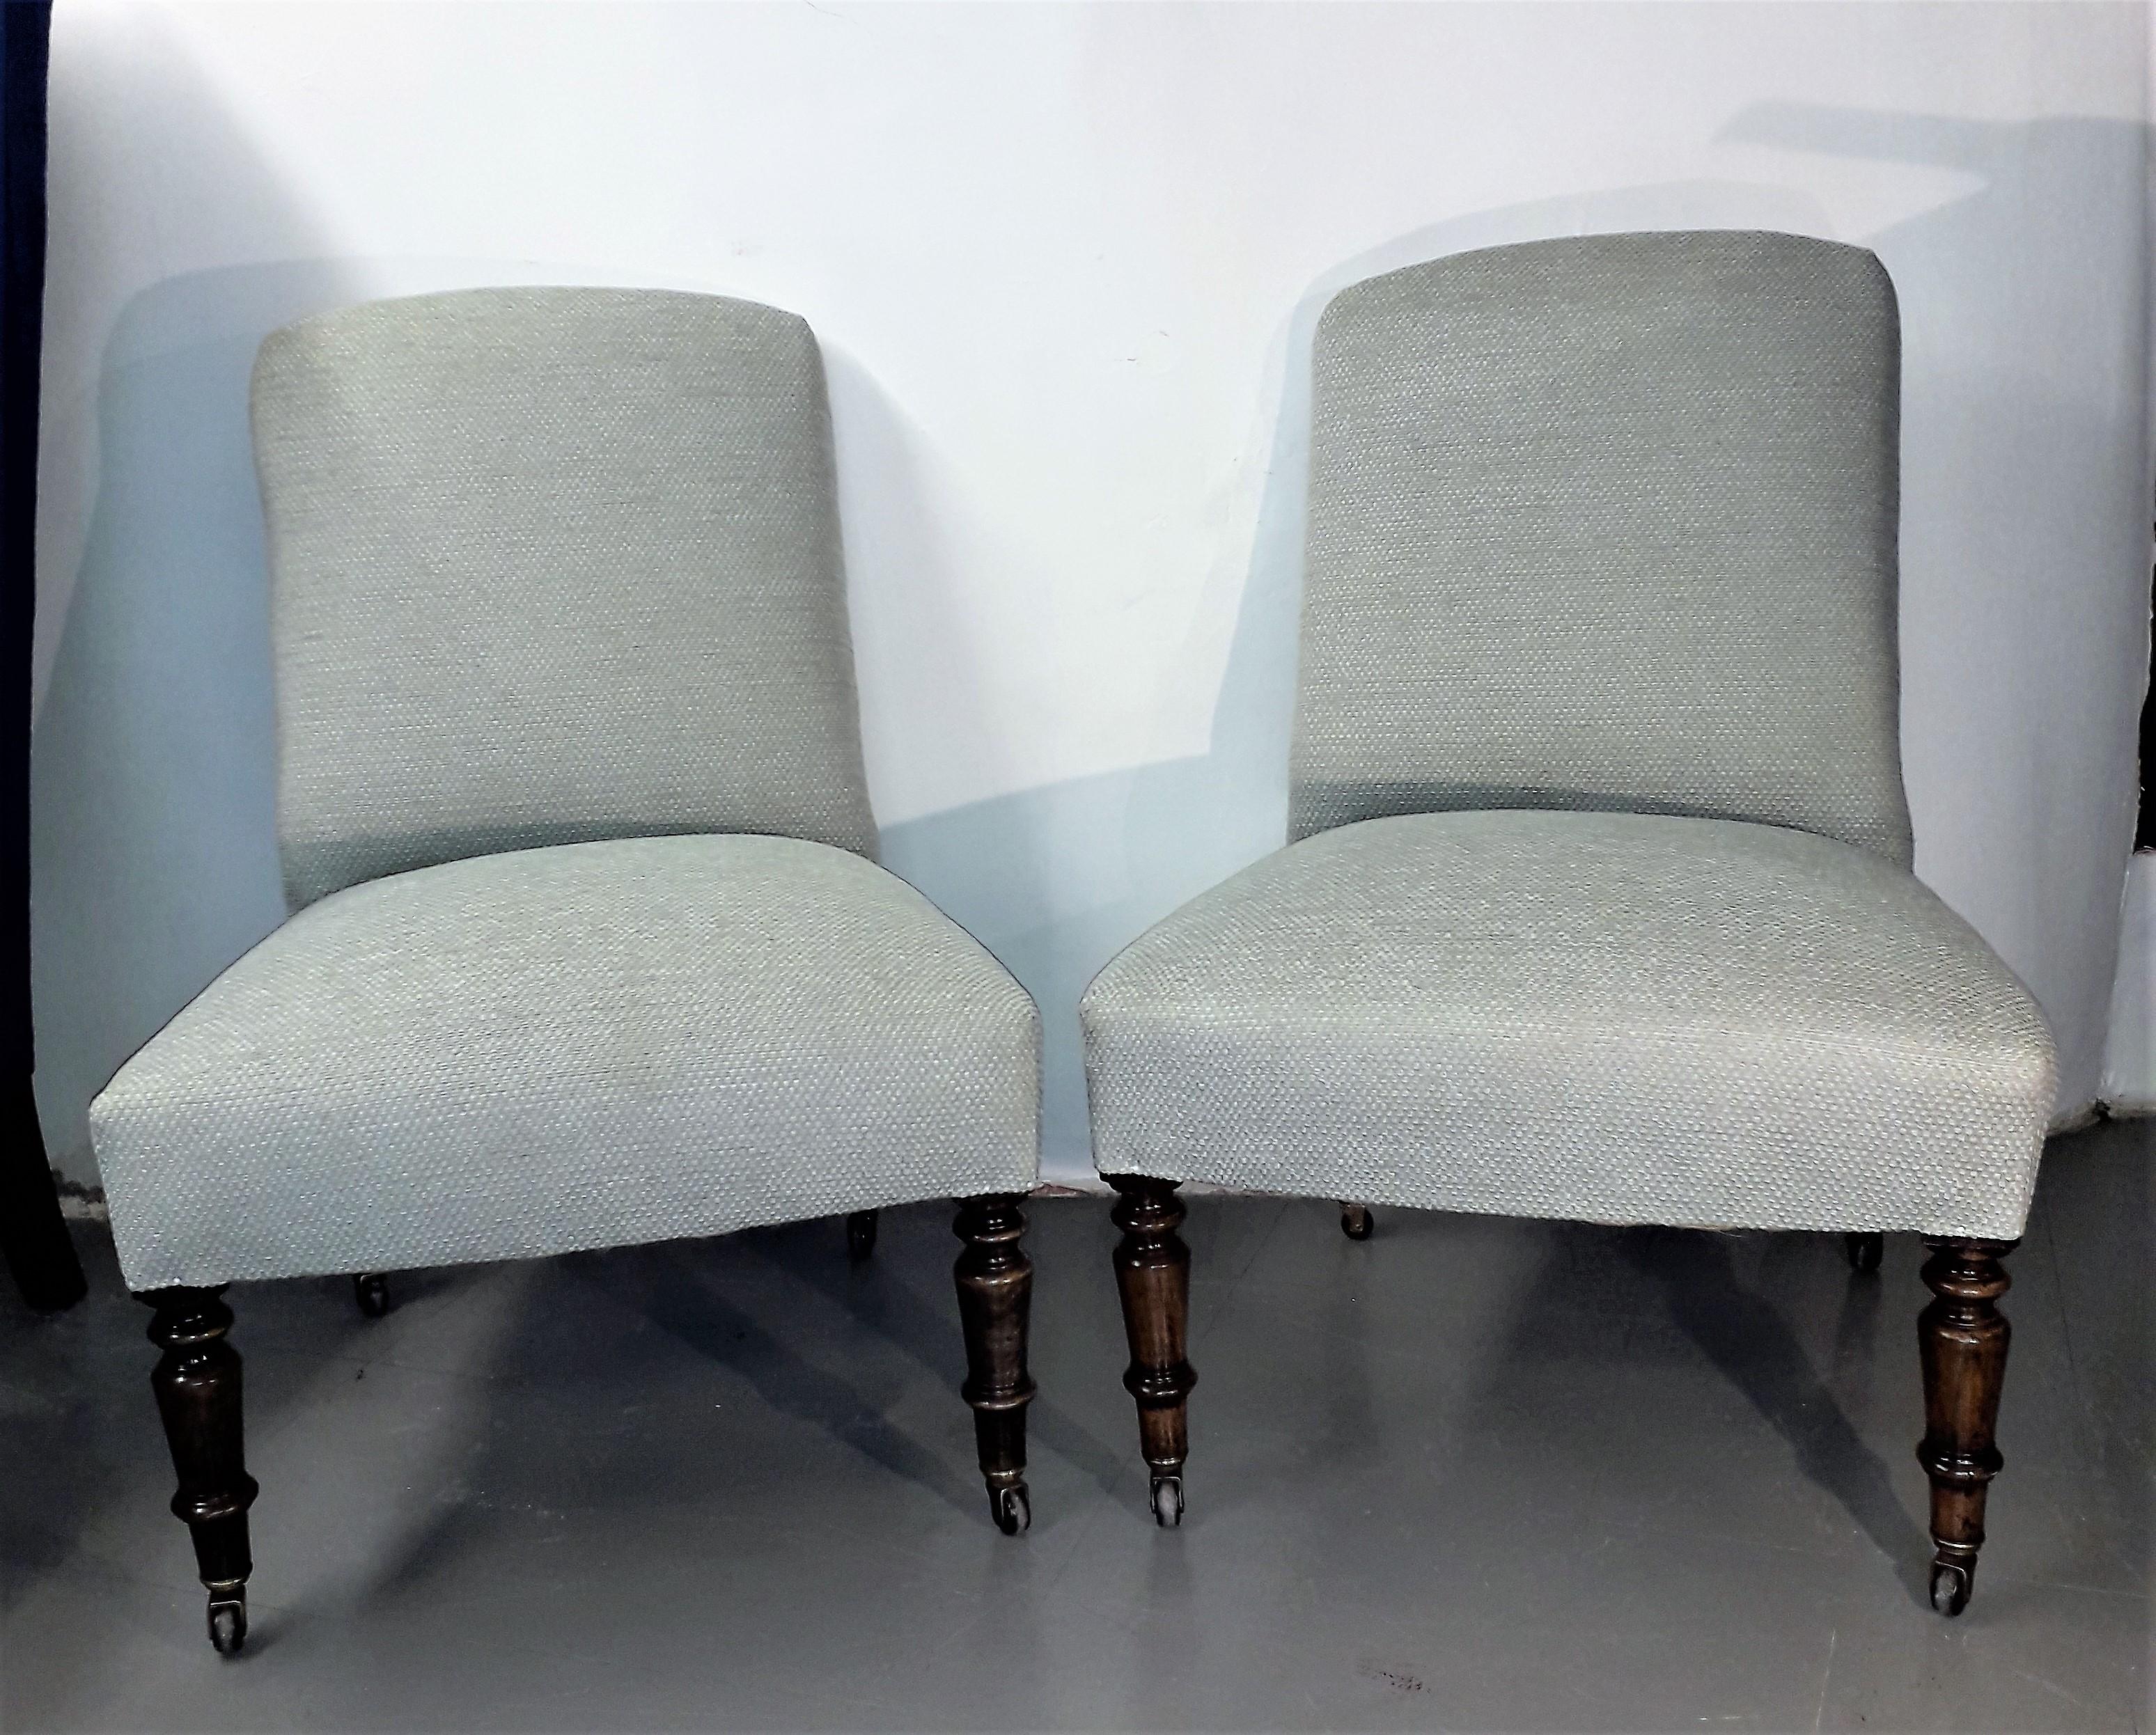 A fabulous pair of low back upholstered chairs, nicely wide seated design with beautifully French polished ebonized legs.
Fully reupholstered.